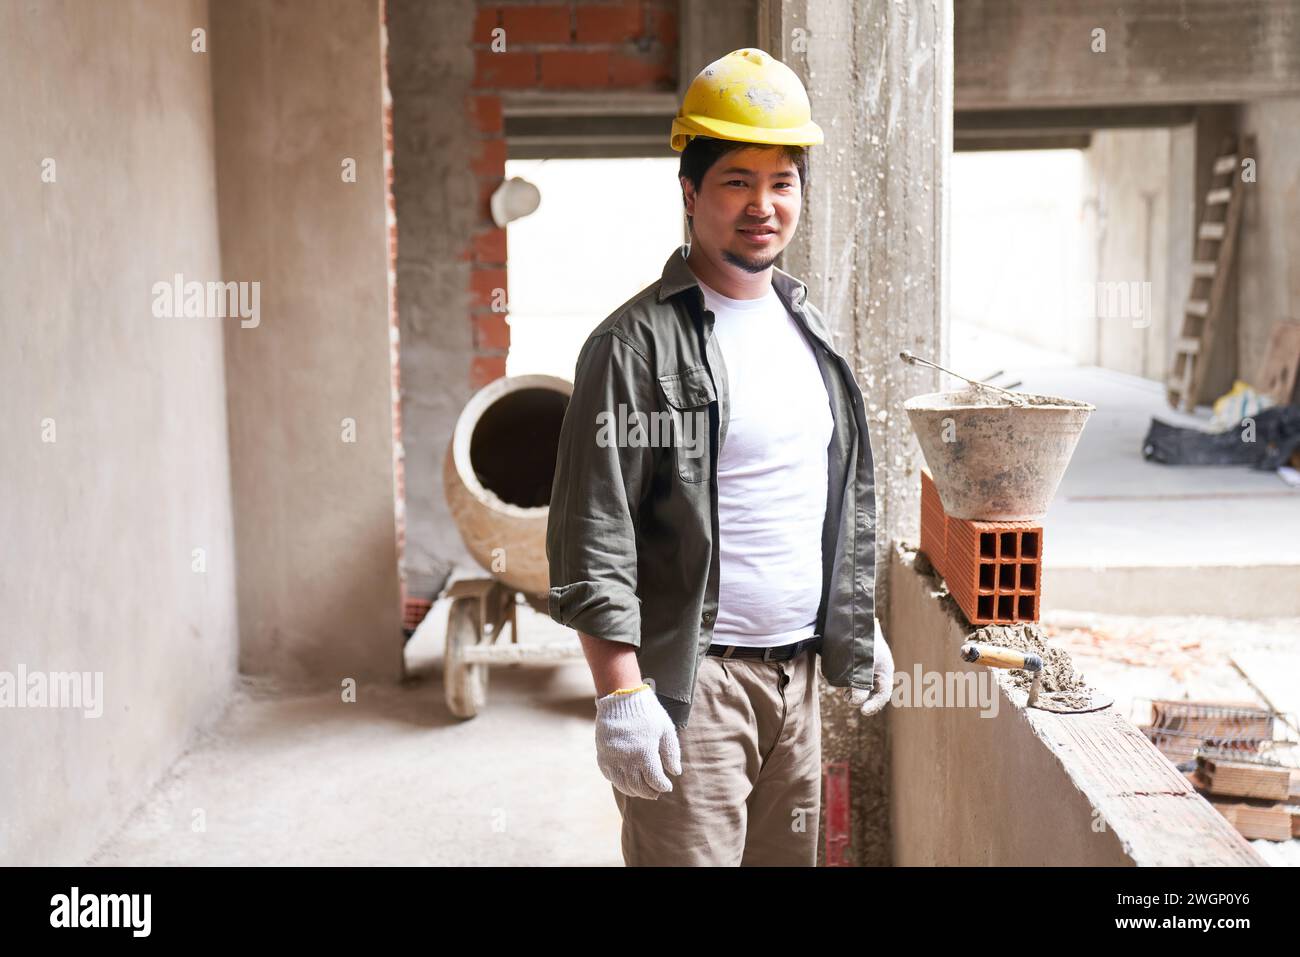 Smiling young bricklayer by incomplete wall Stock Photo